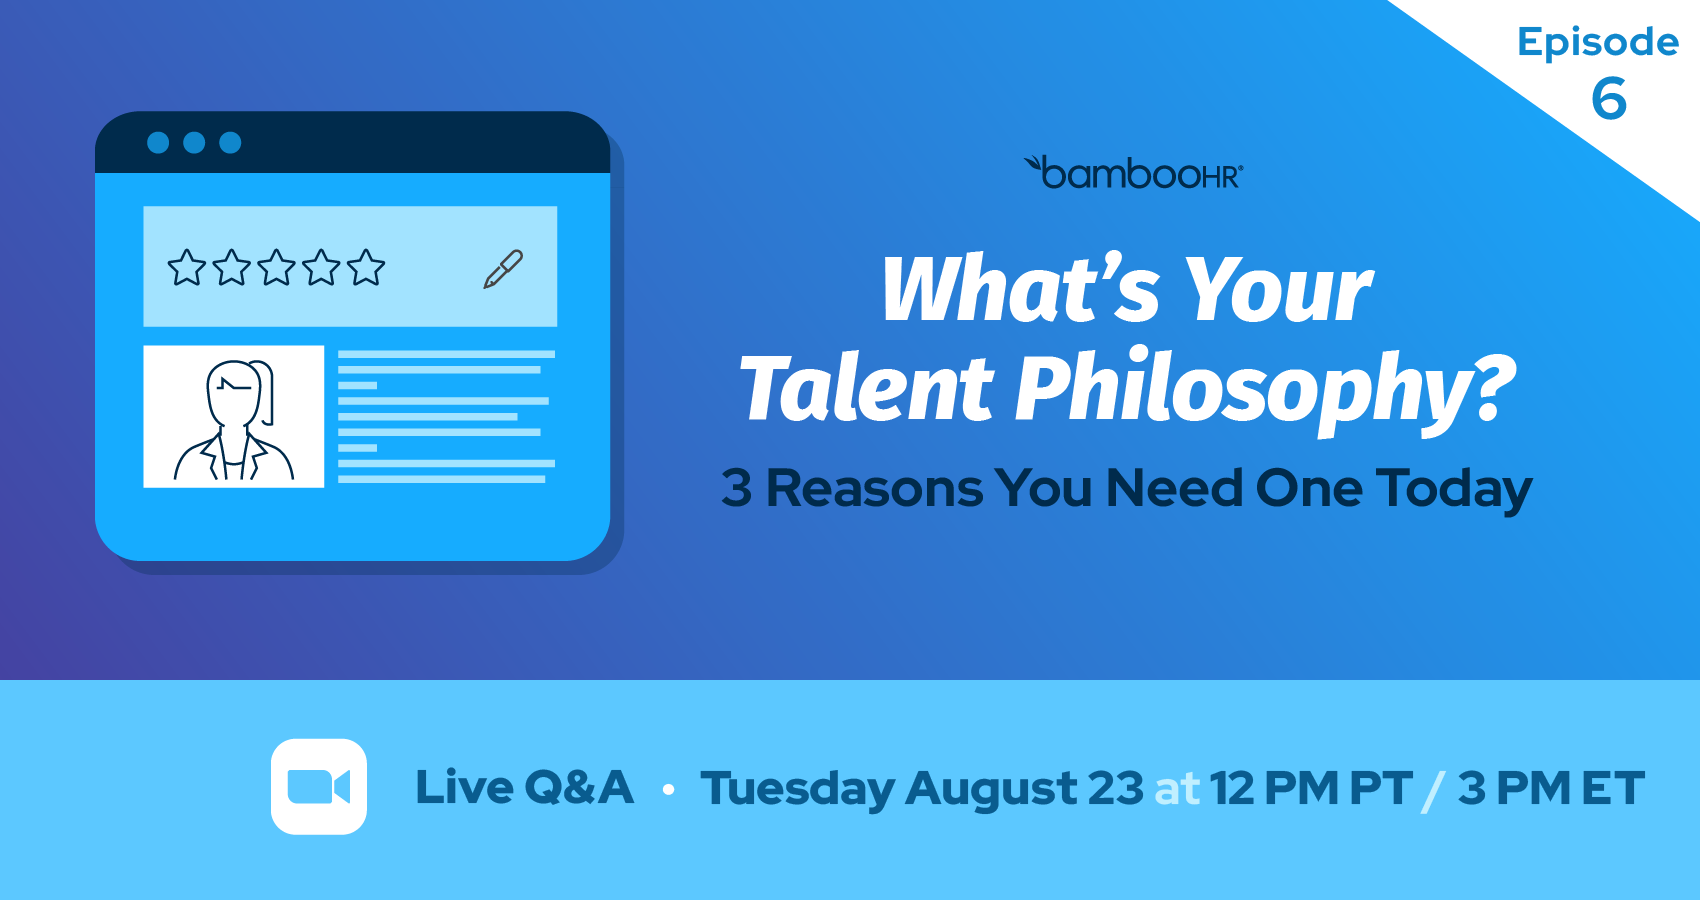 Episode 6: What's Your Talent Philosophy? 3 Reasons You Need One Today